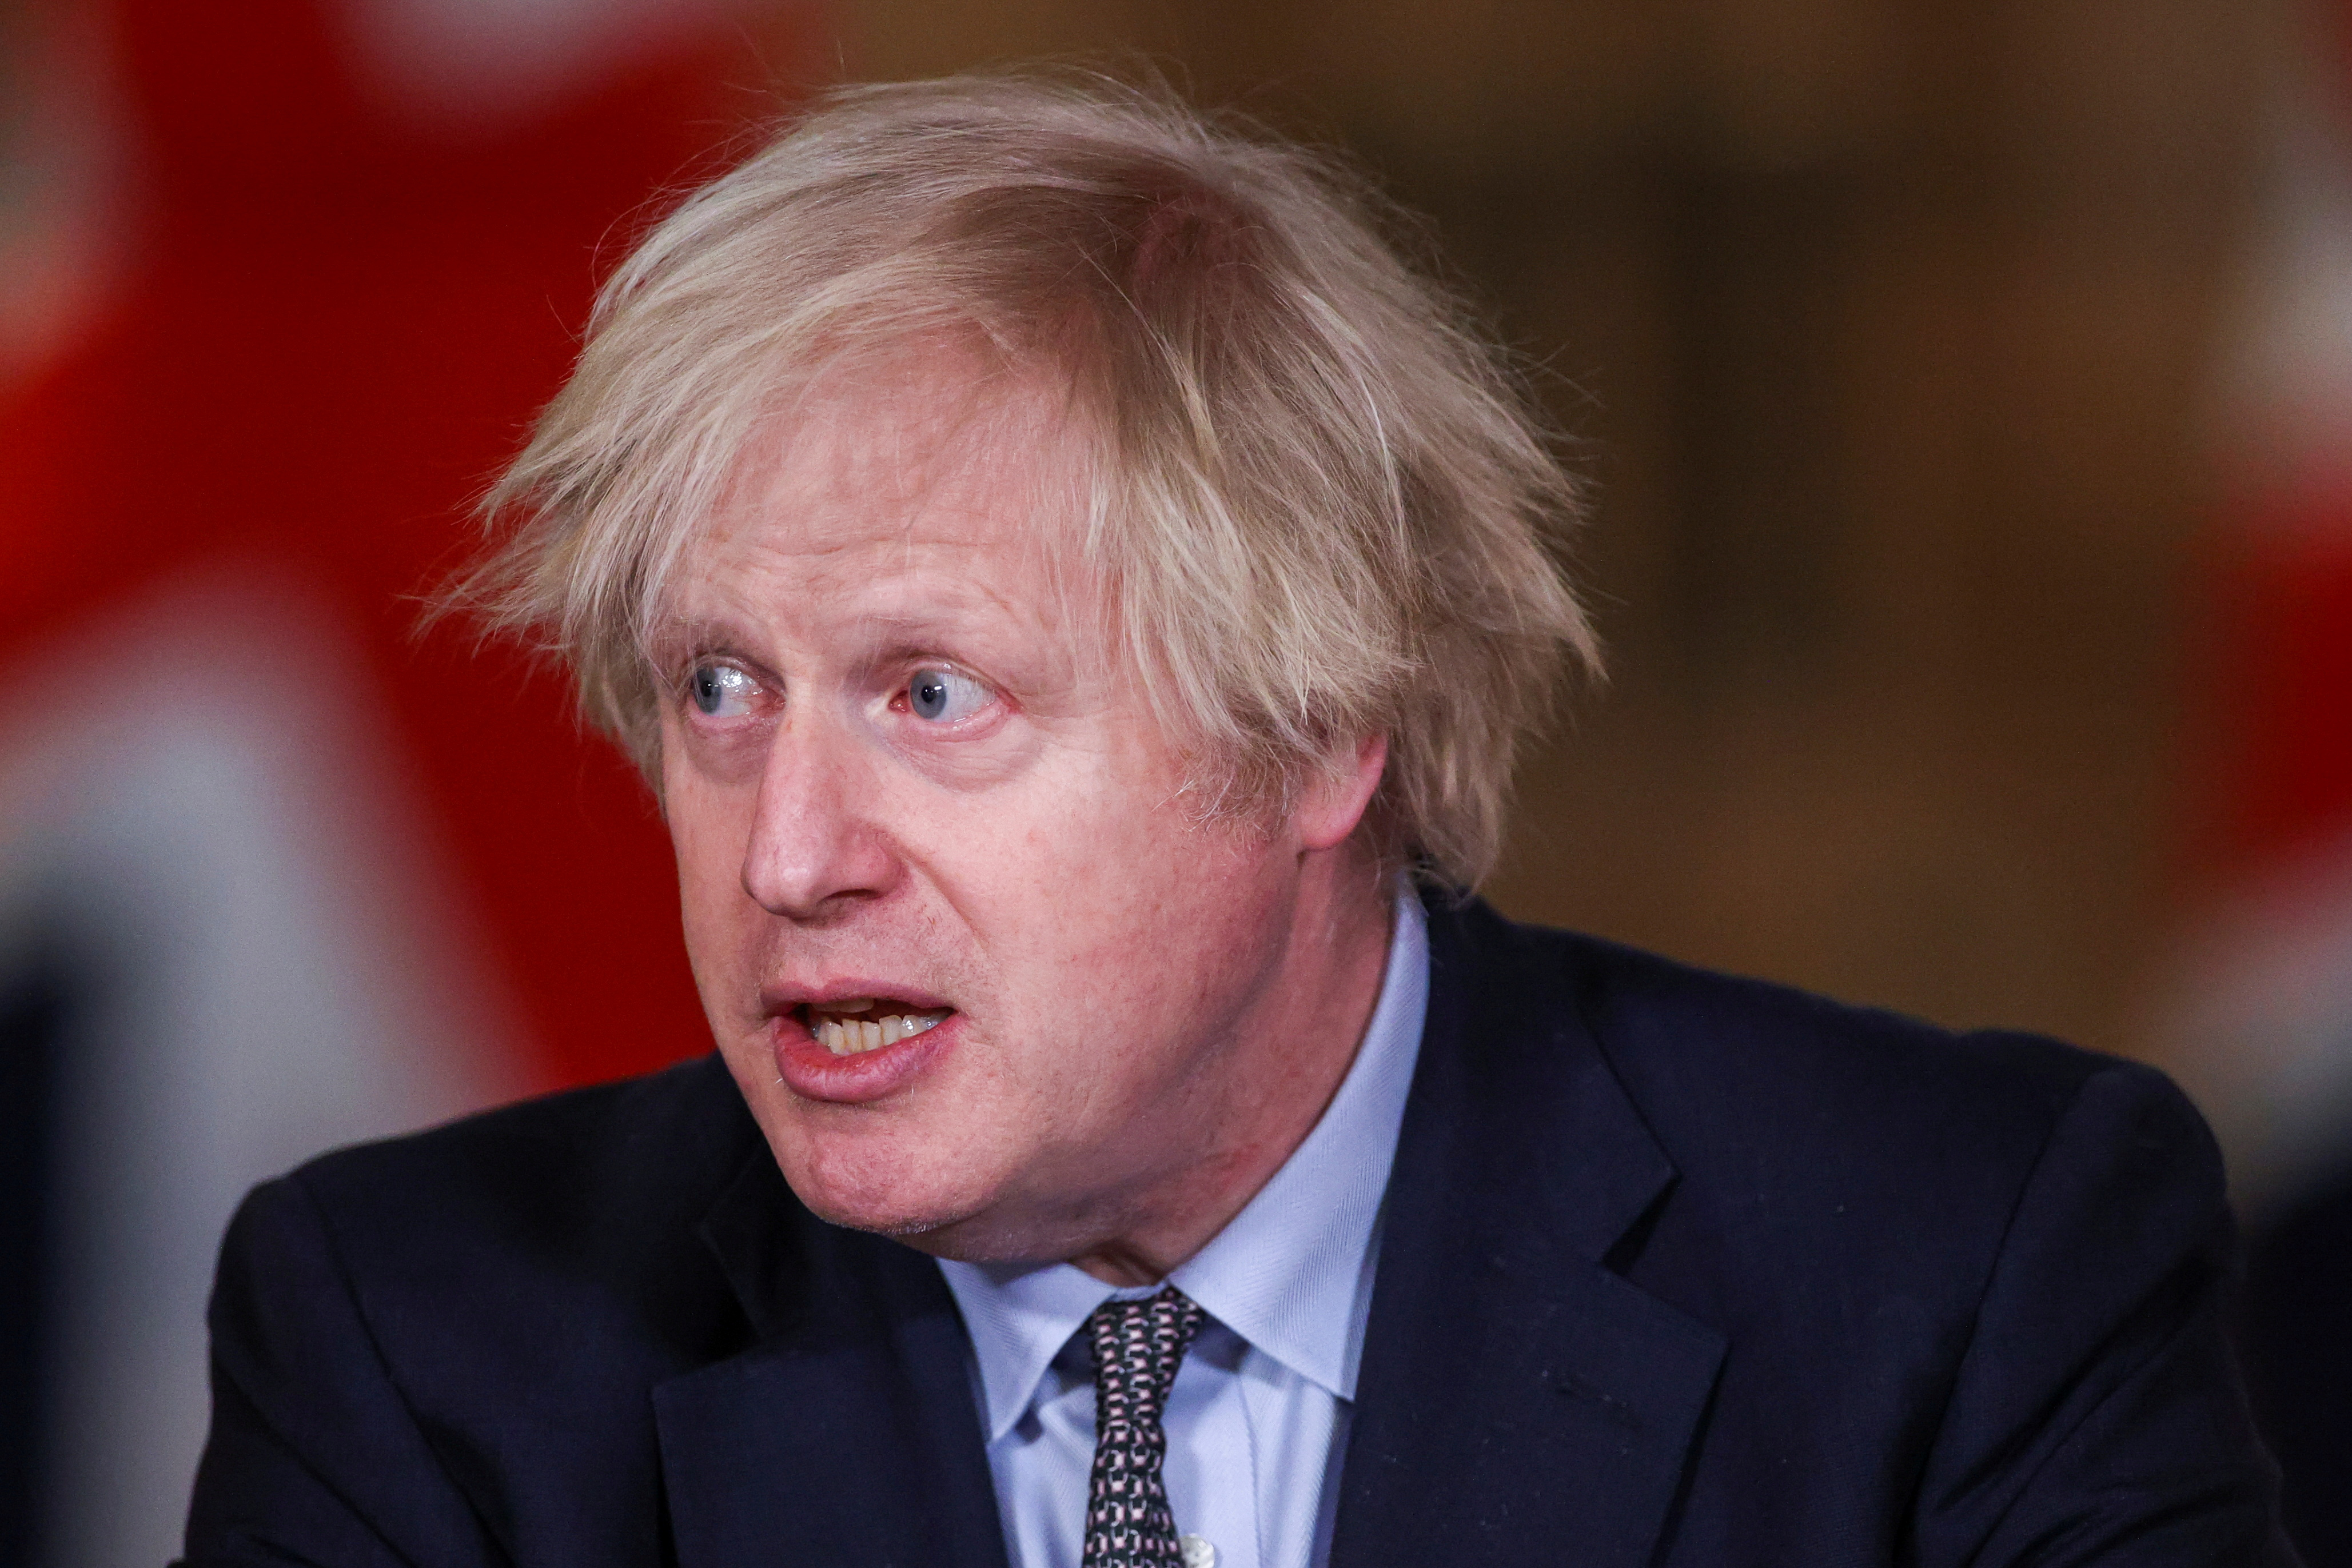 Britain's PM Johnson holds a news conference at 10 Downing Street in London